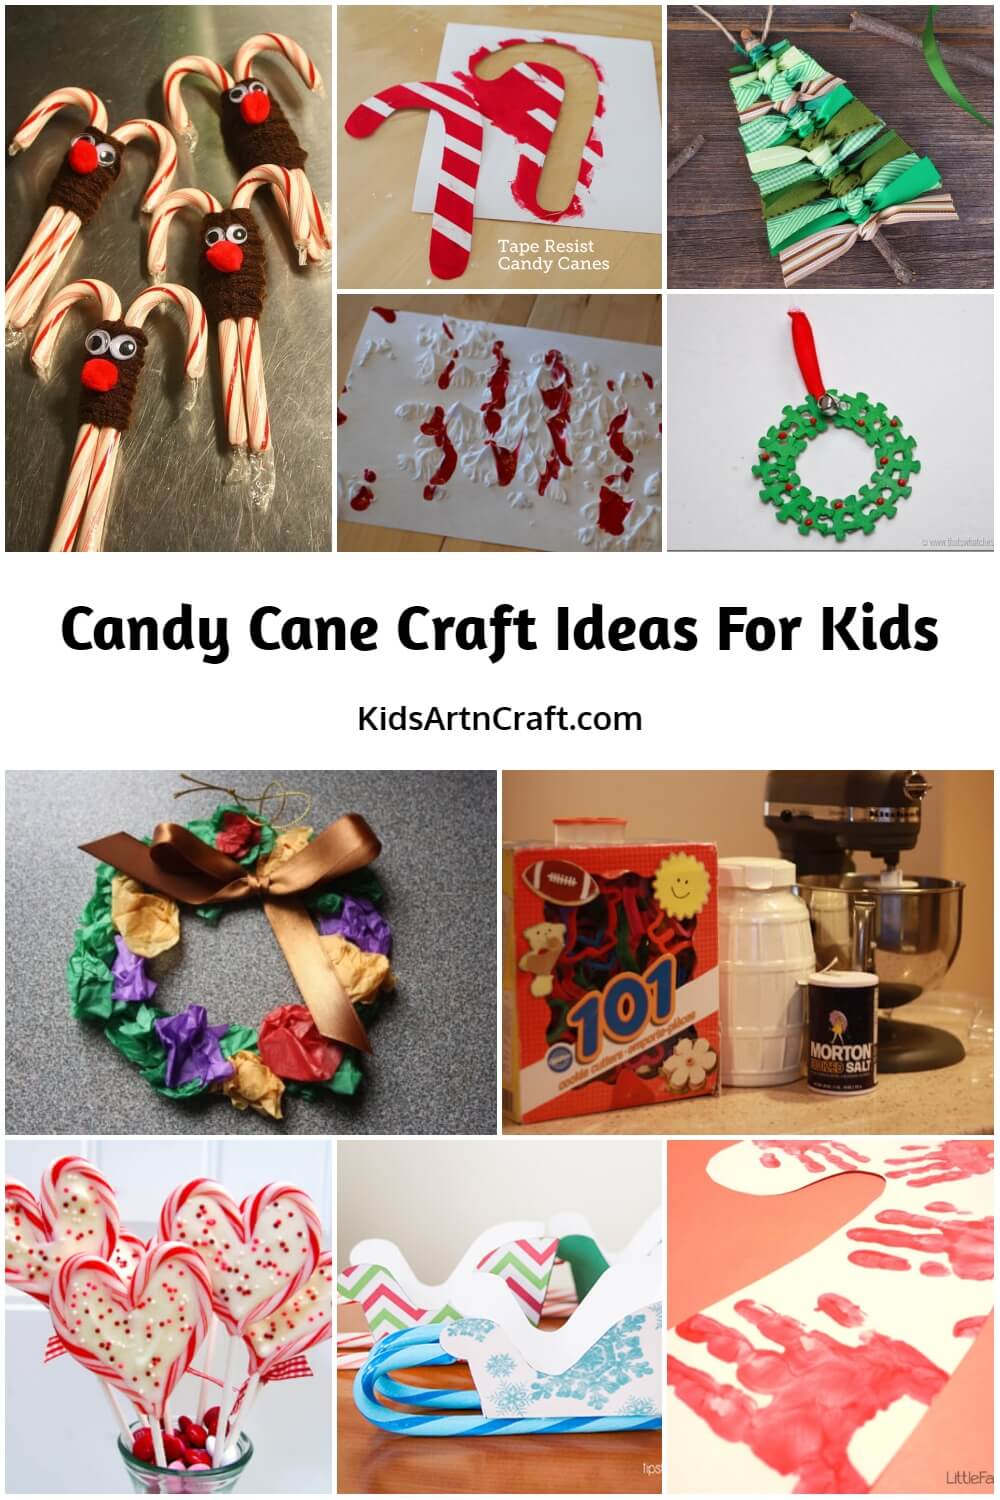 Candy Cane Craft Ideas For Kids